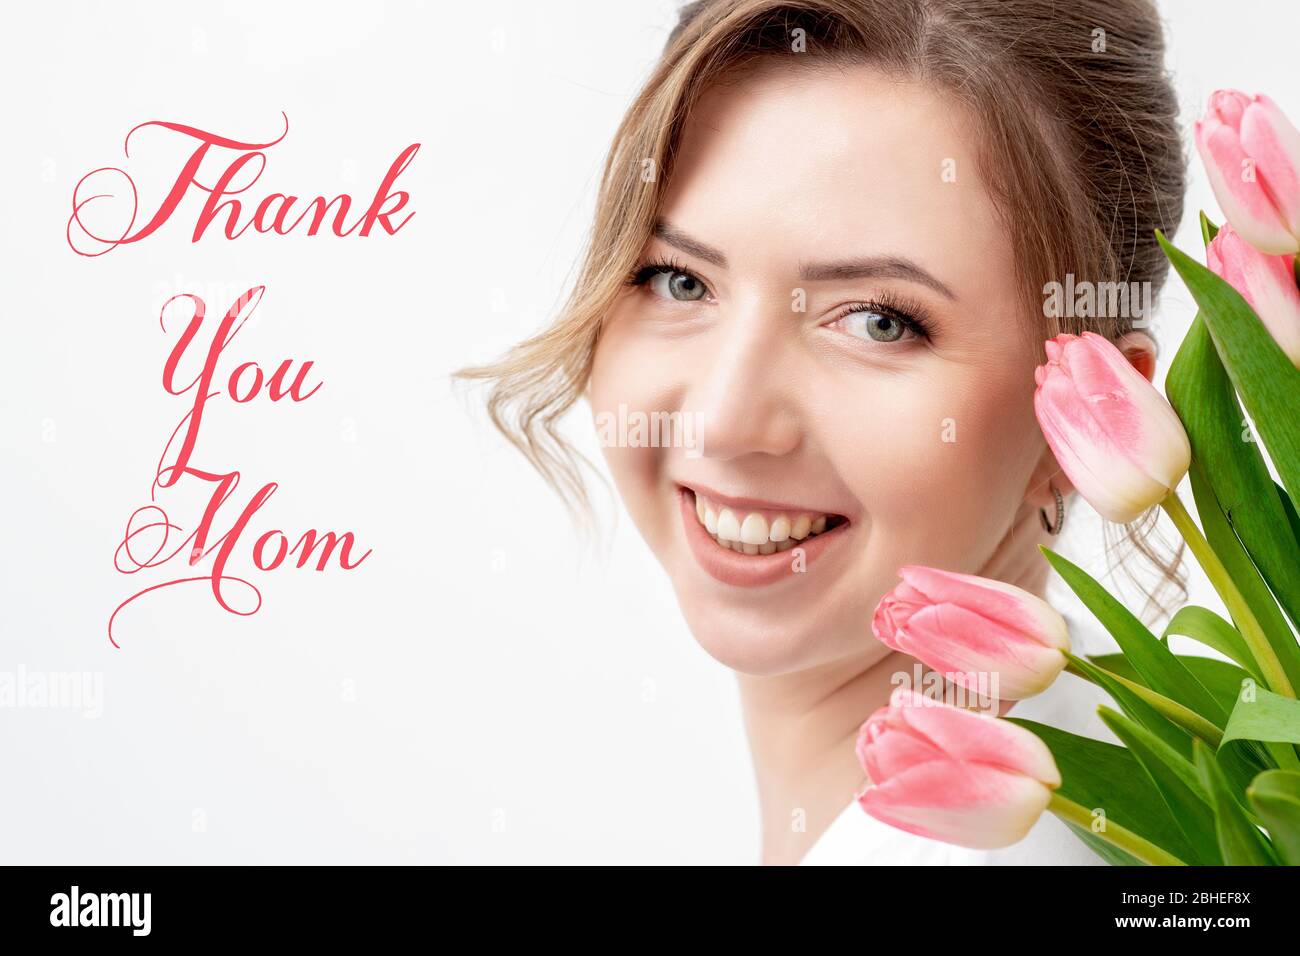 Smiling young woman with pink tulips, sign text Thank You Mom on ...